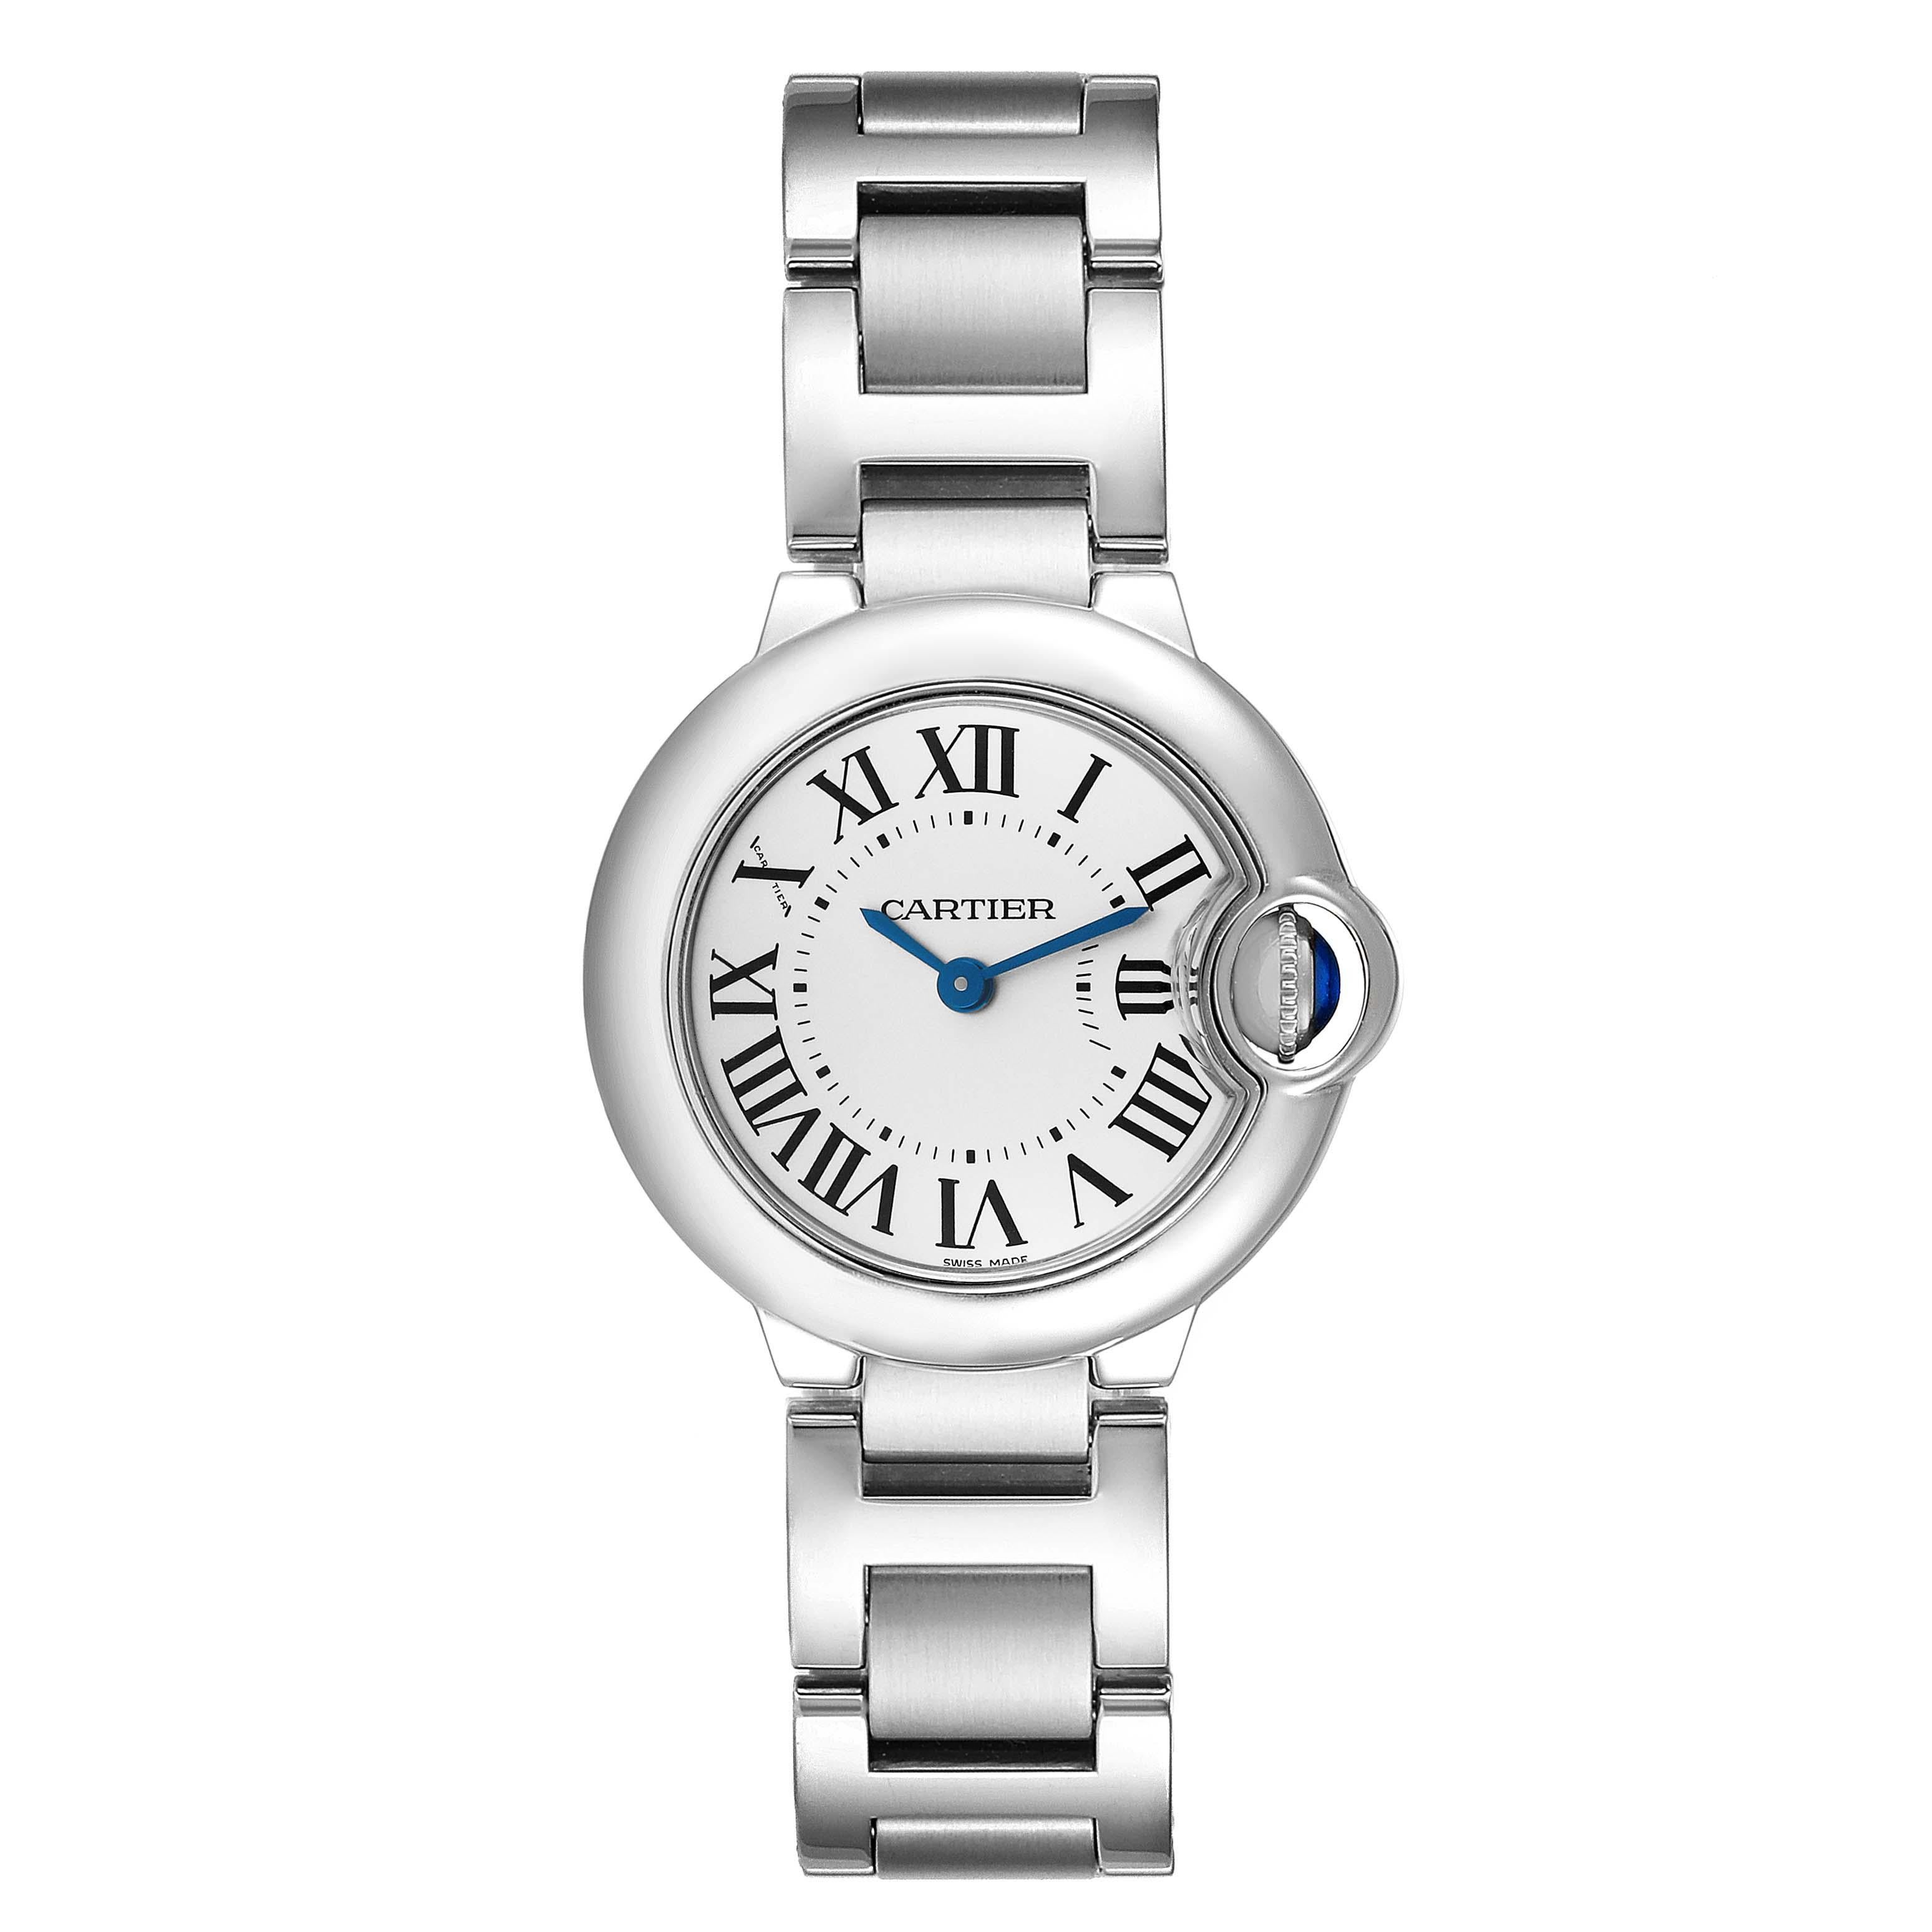 Cartier Ballon Bleu Silver Dial Quartz Steel Ladies Watch W69010Z4. Quartz movement. Round stainless steel case 28.0 mm in diameter. Fluted crown set with a blue spinel cabochon. Stainless steel smooth bezel. Scratch resistant sapphire crystal.